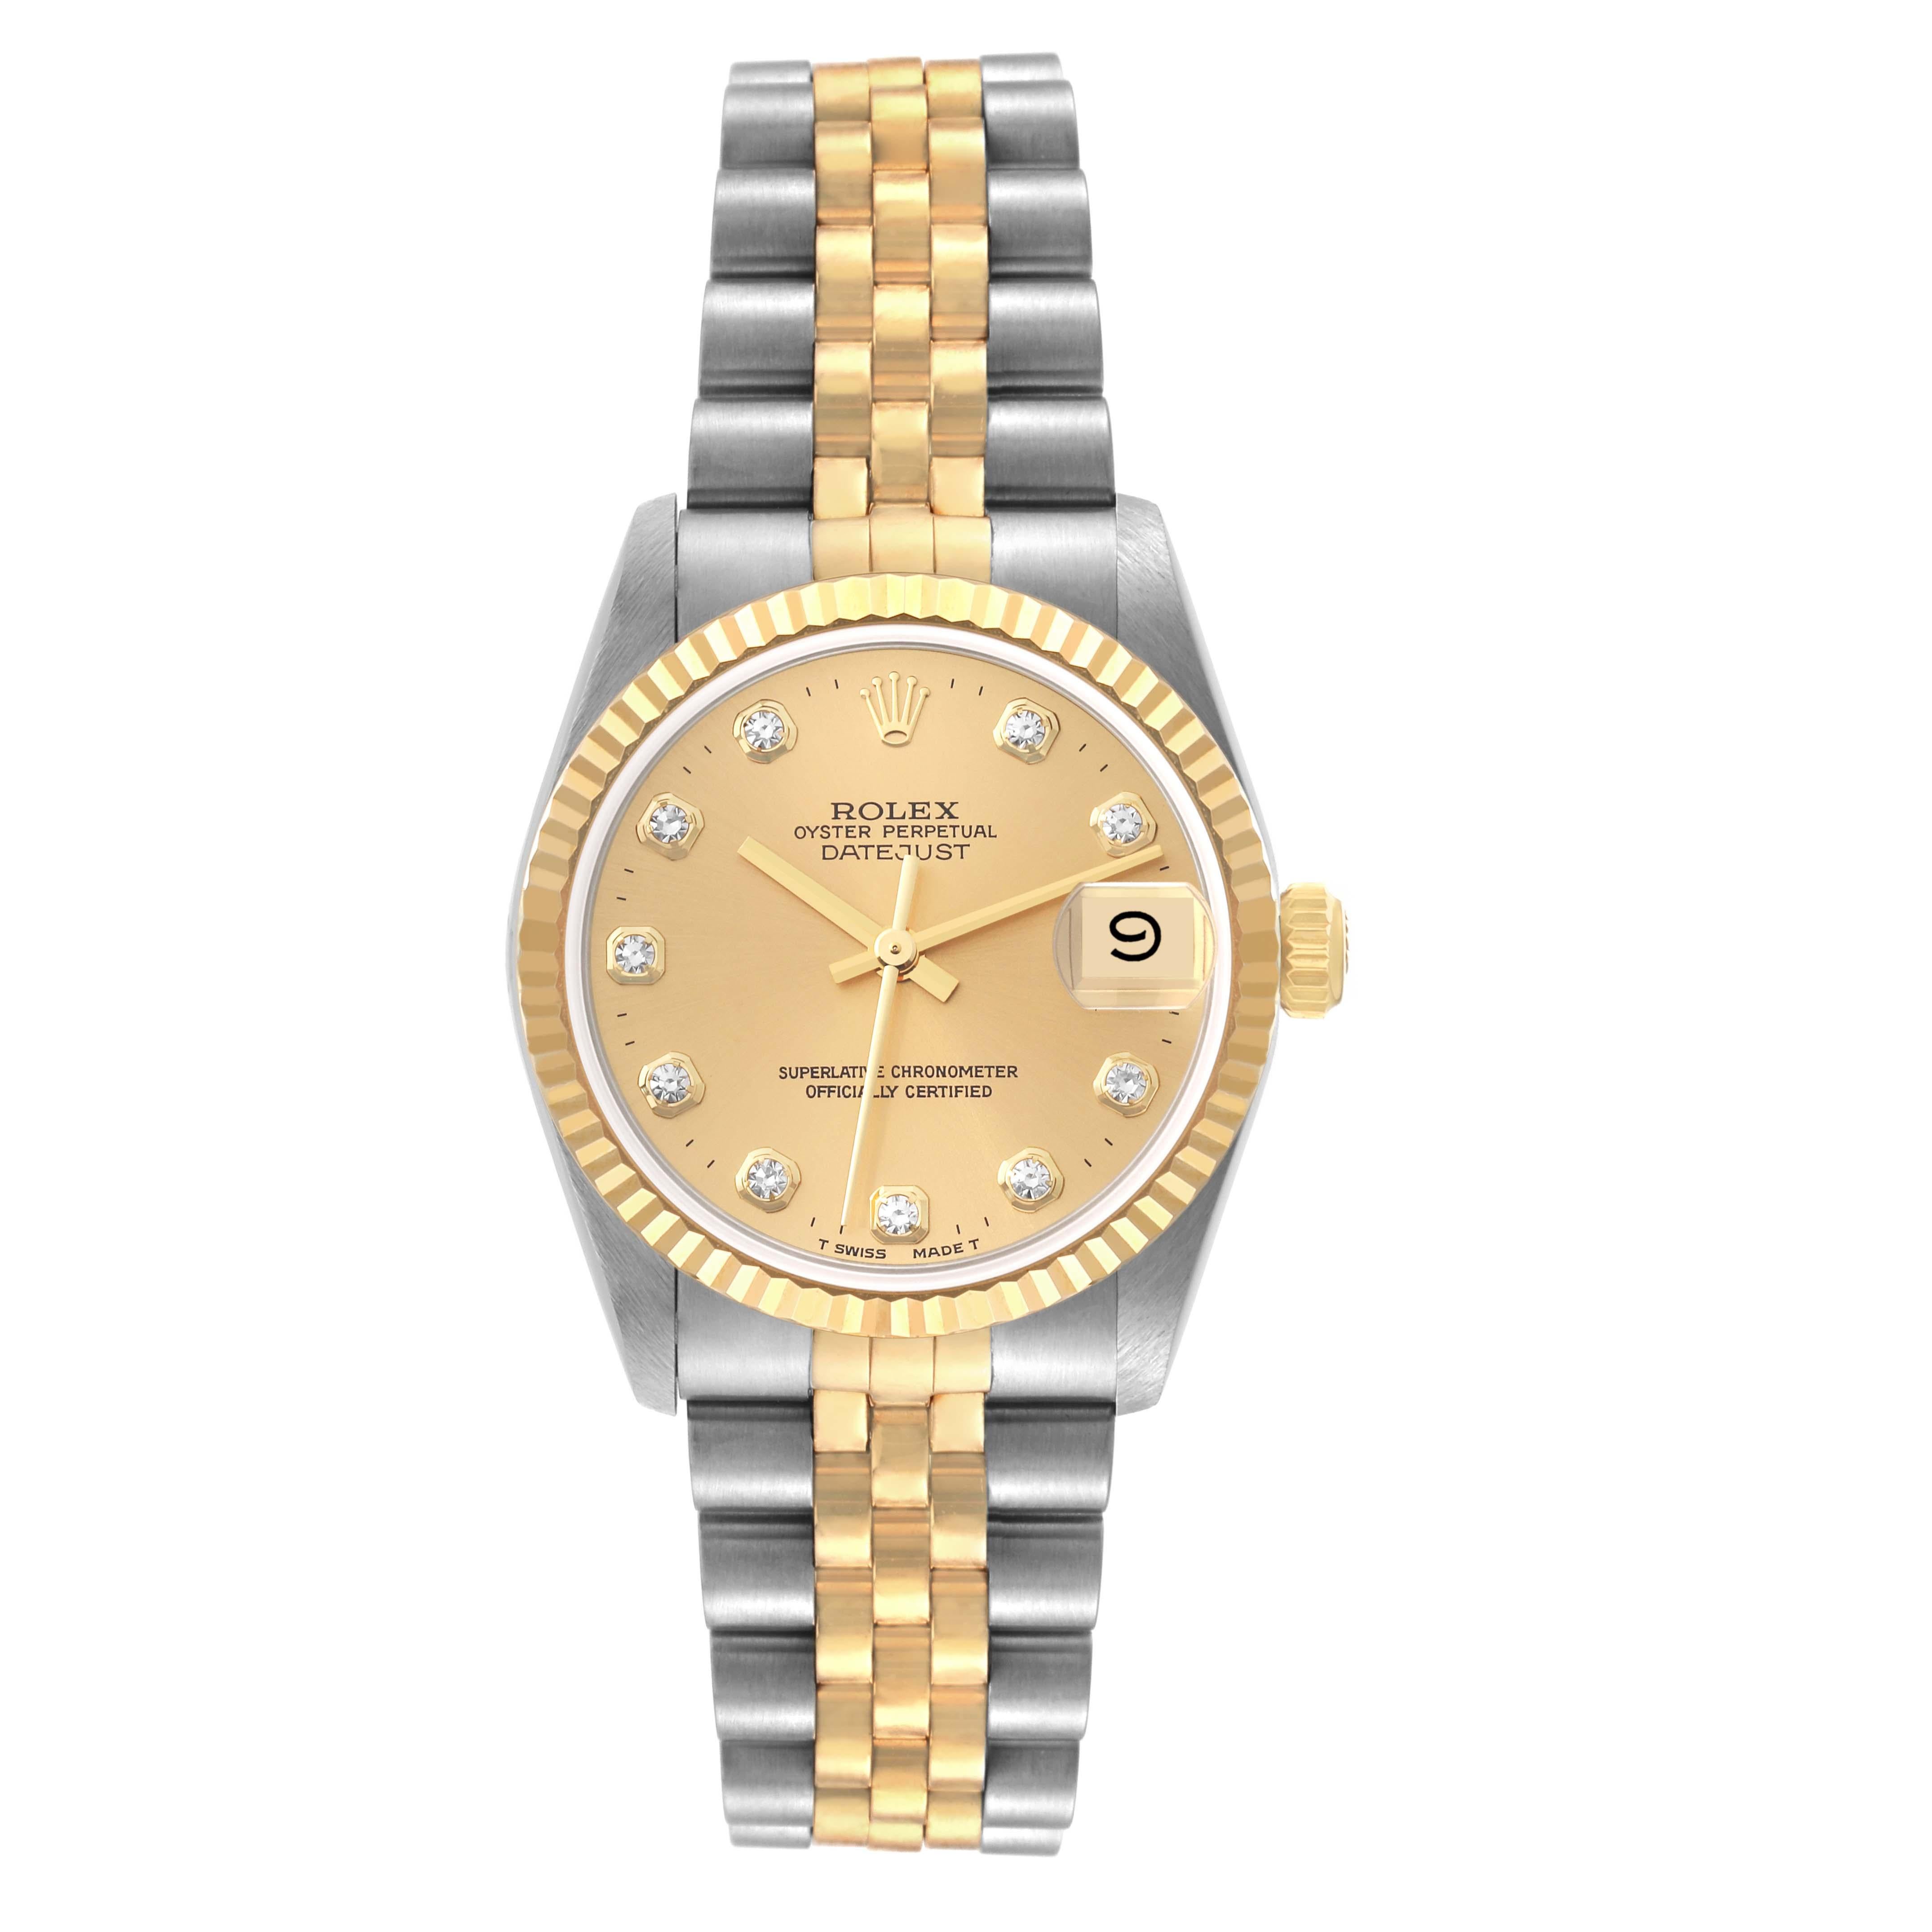 Rolex Datejust Midsize Steel Yellow Gold Diamond Ladies Watch 68273 Unworn NOS. Officially certified chronometer automatic self-winding movement. Stainless steel oyster case 31 mm in diameter. Rolex logo on an 18K yellow gold crown. 18k yellow gold